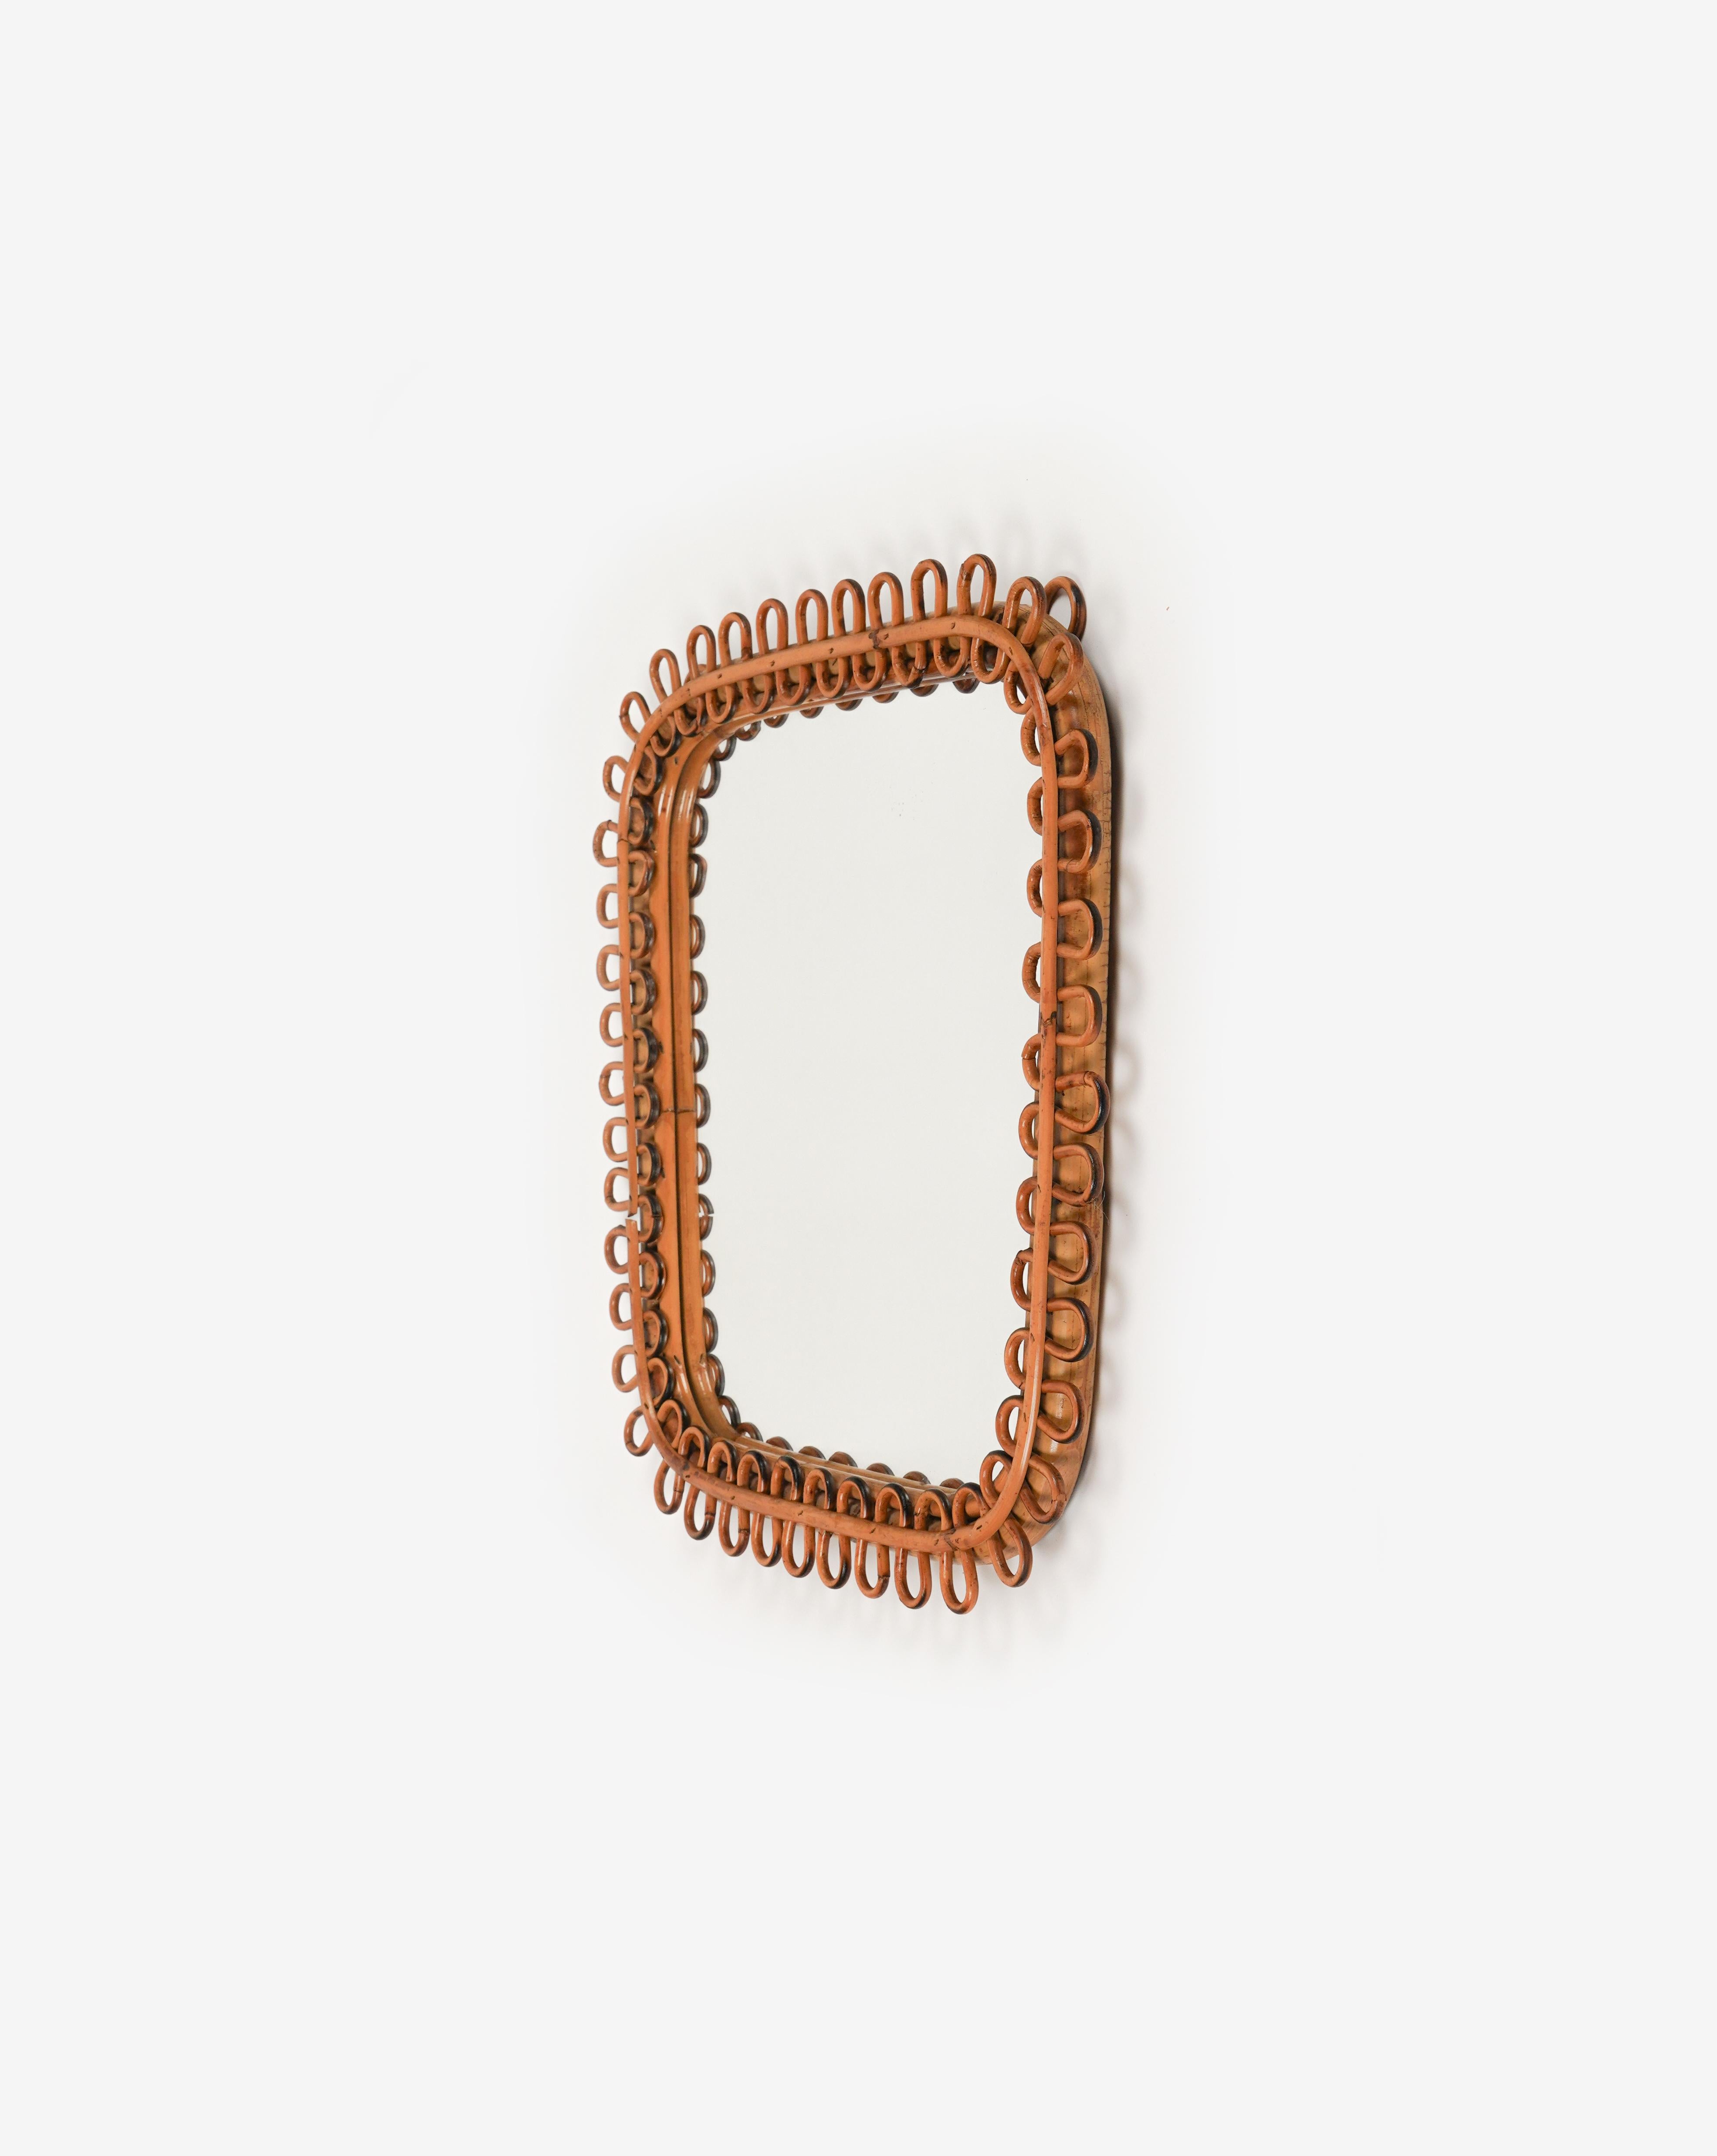 Midcentury Rattan & Bamboo Square Wall Mirror Franco Albini Style, Italy 1960s For Sale 3